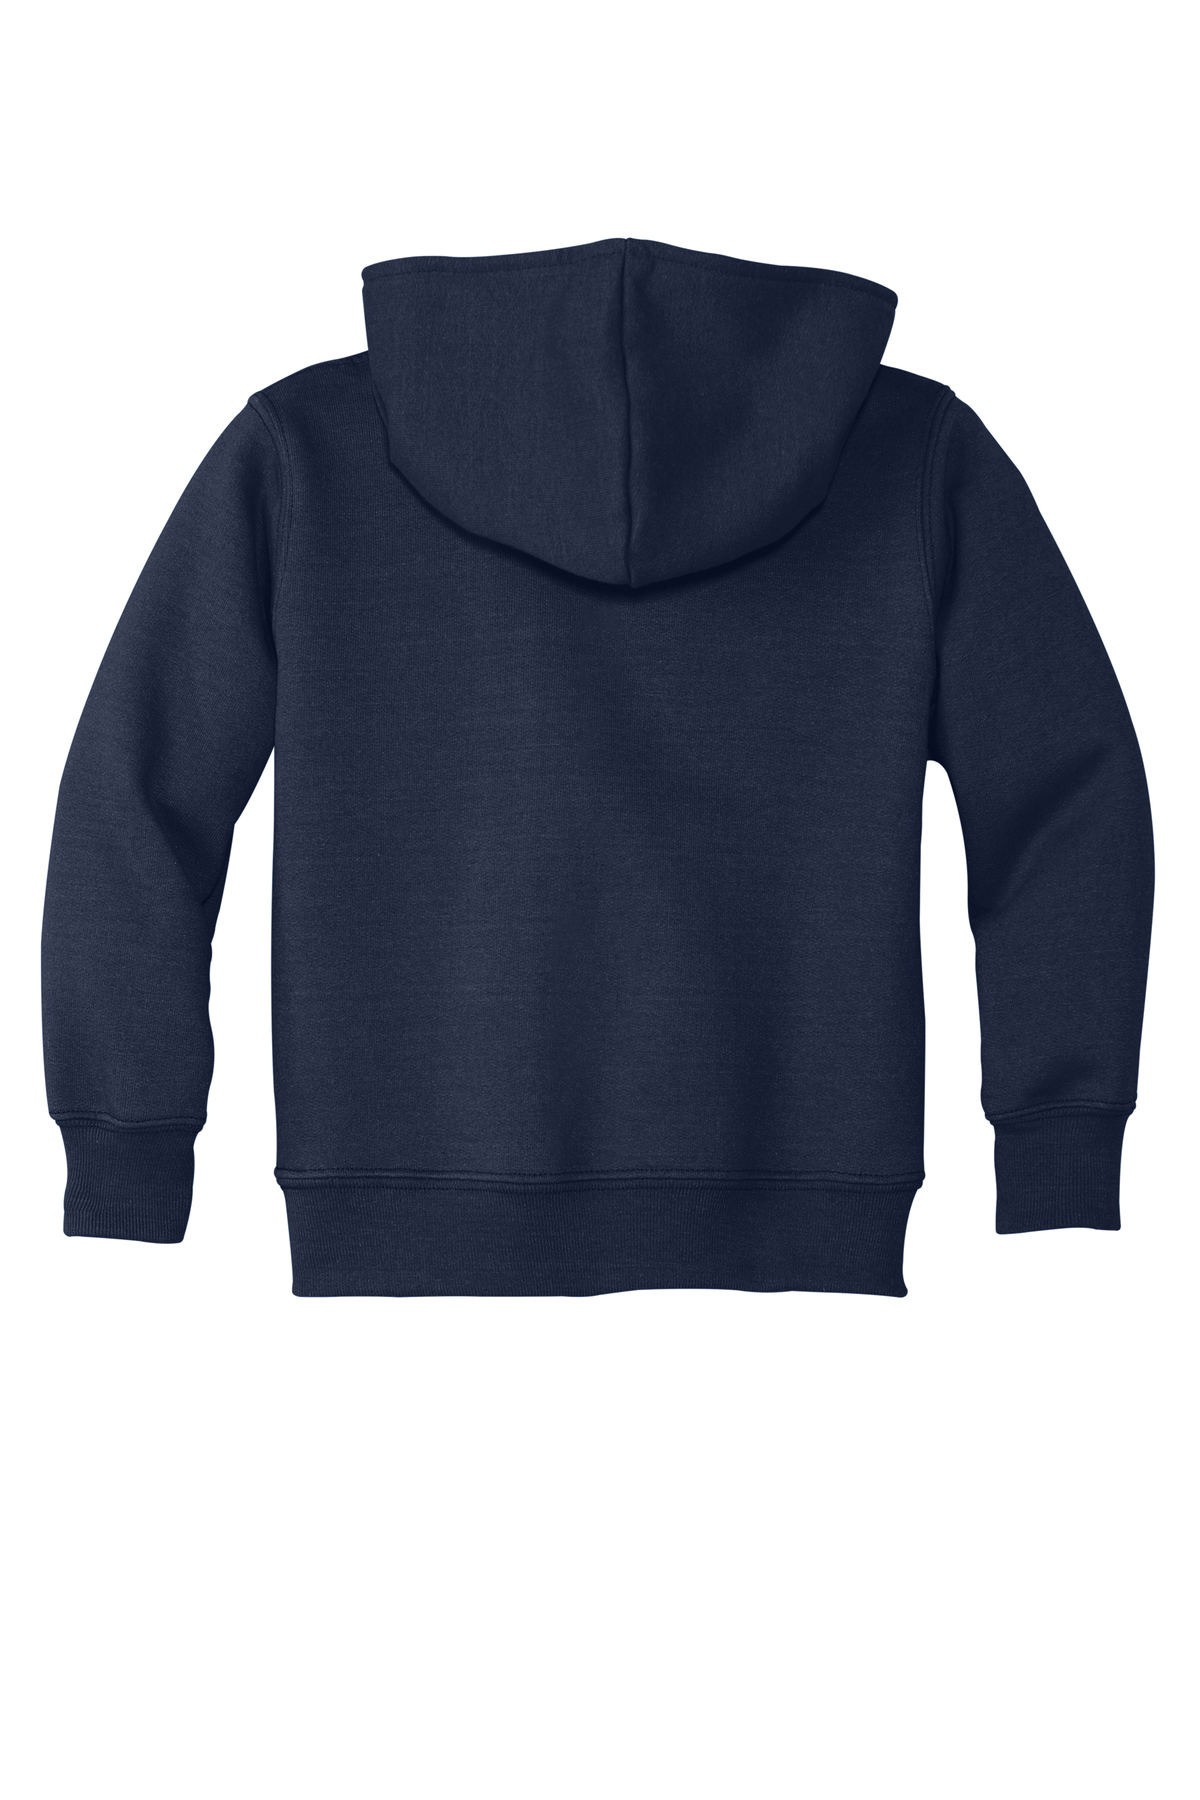 Port & Toddler Sweatshirt | Company Port Pullover & | Product Fleece Core Company Hooded